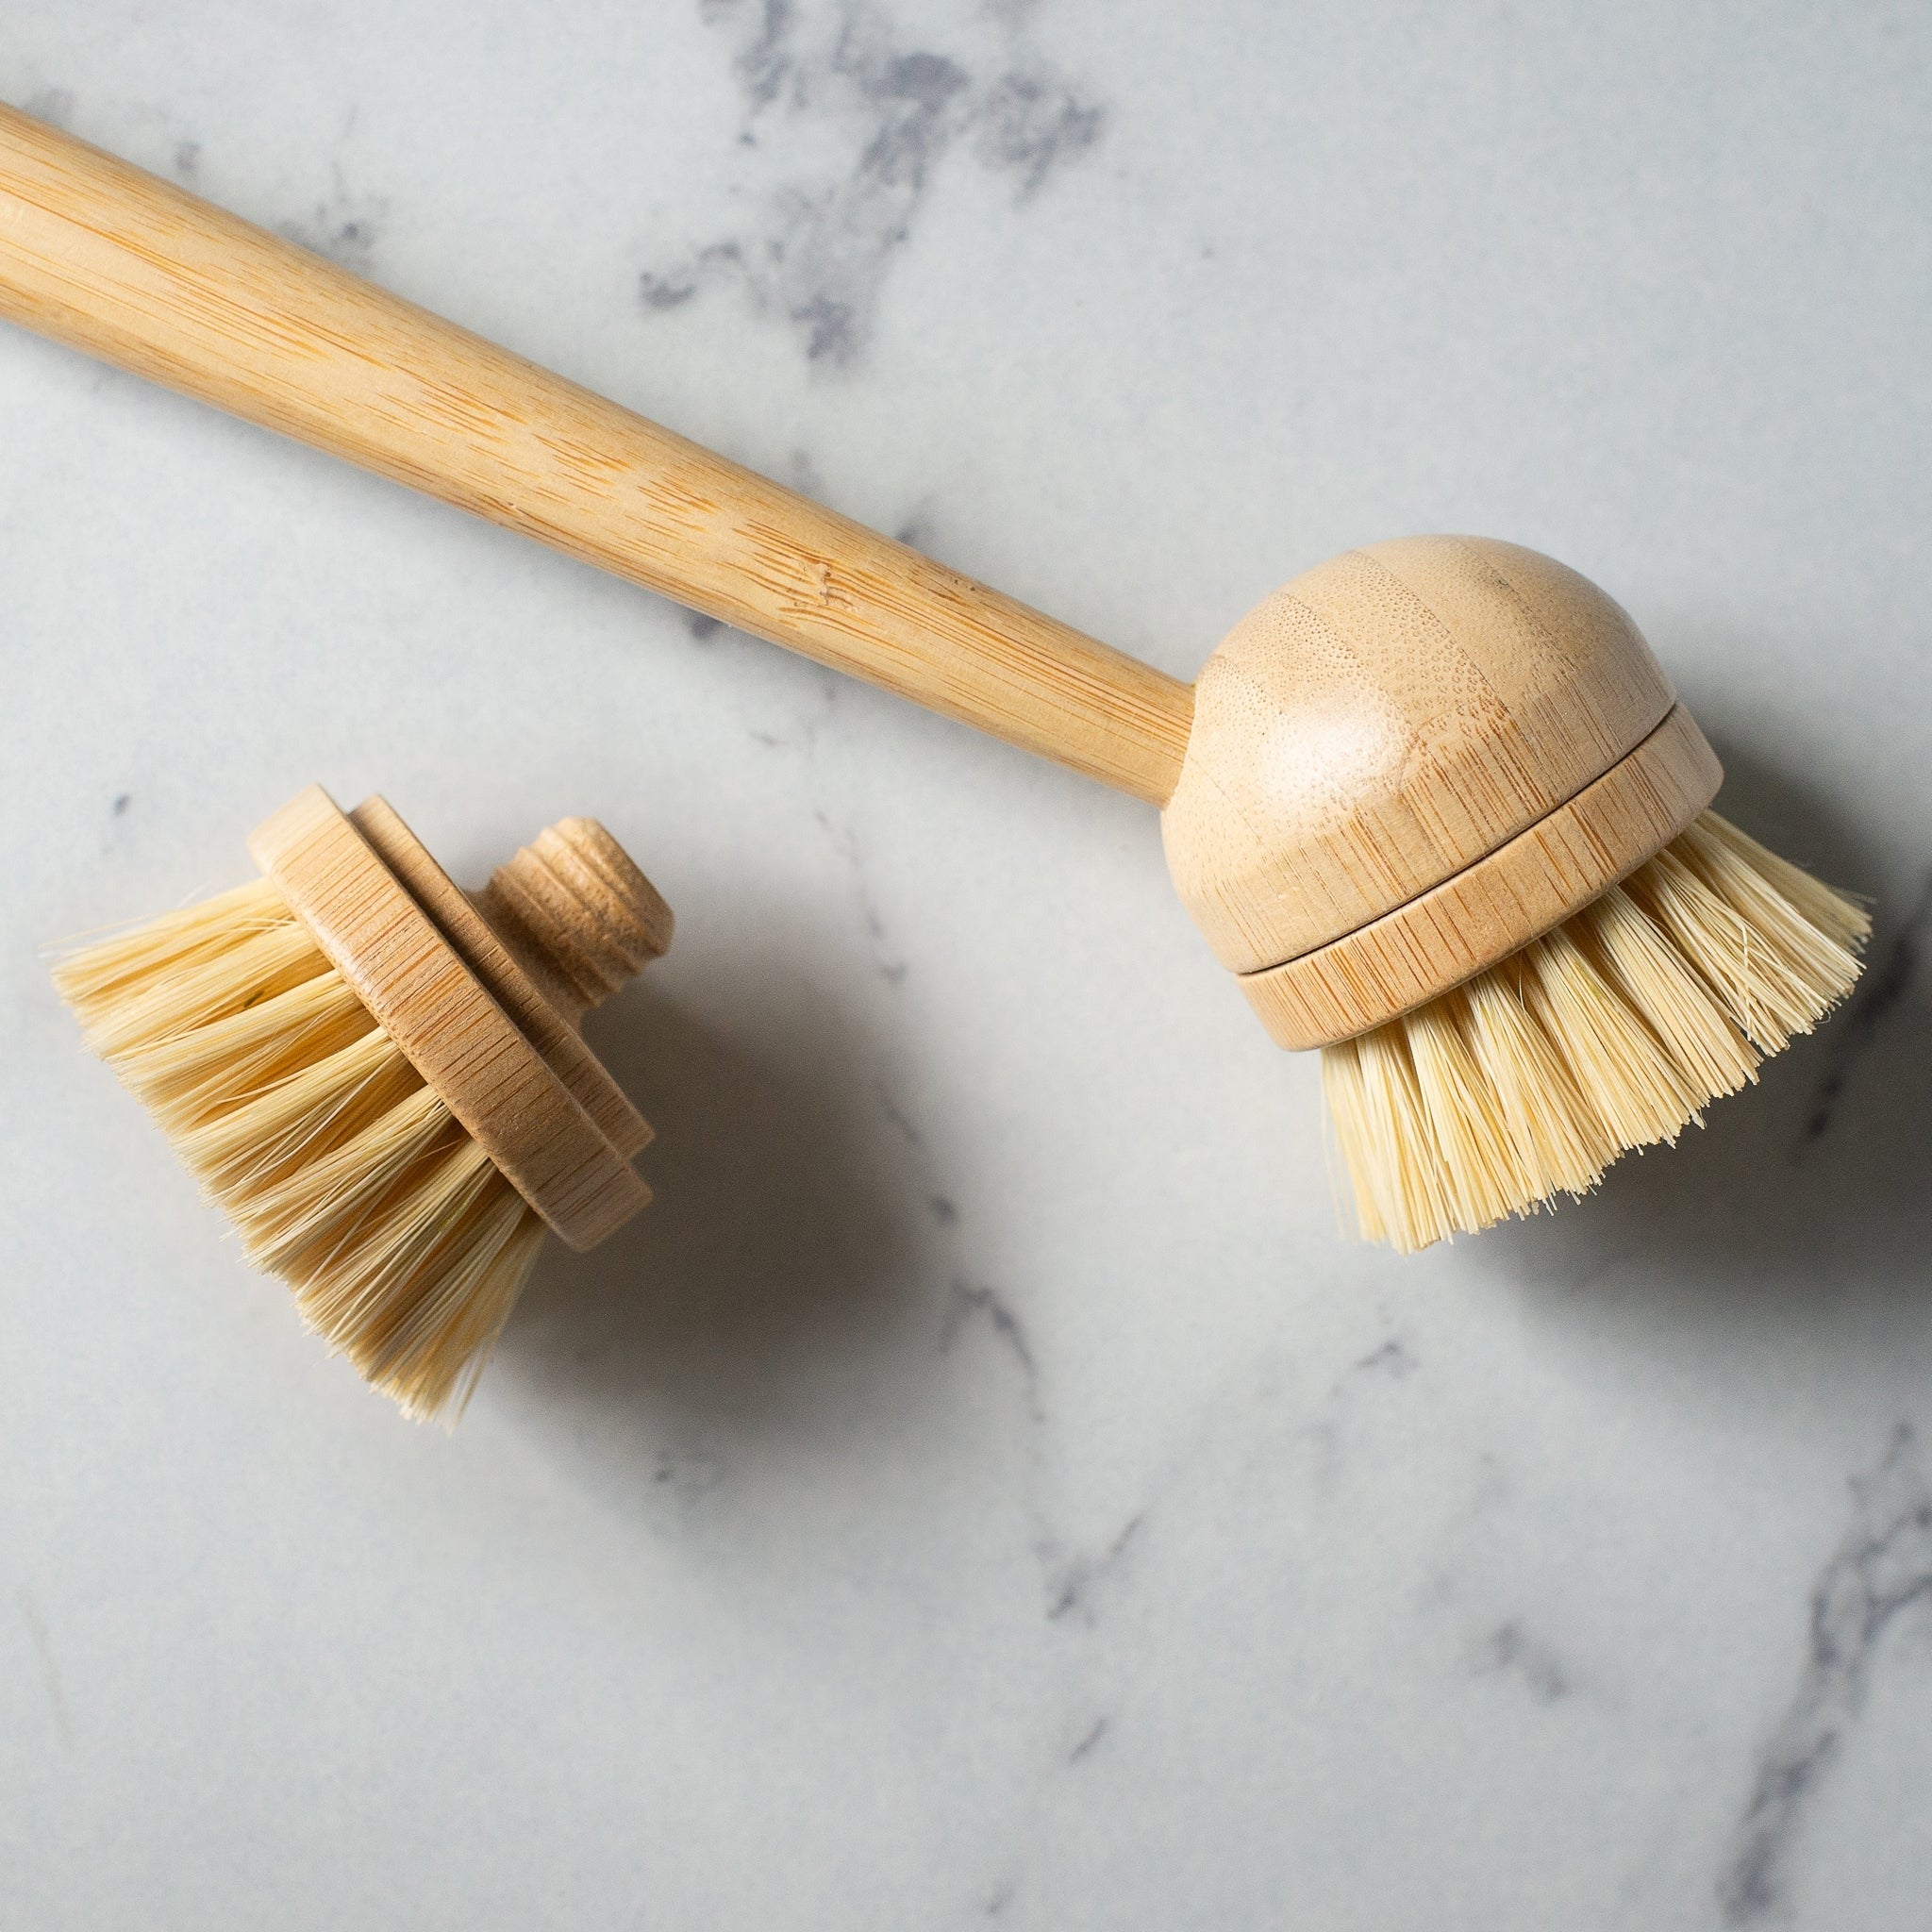 EcoVibe Wooden Dish Brush- replacement head